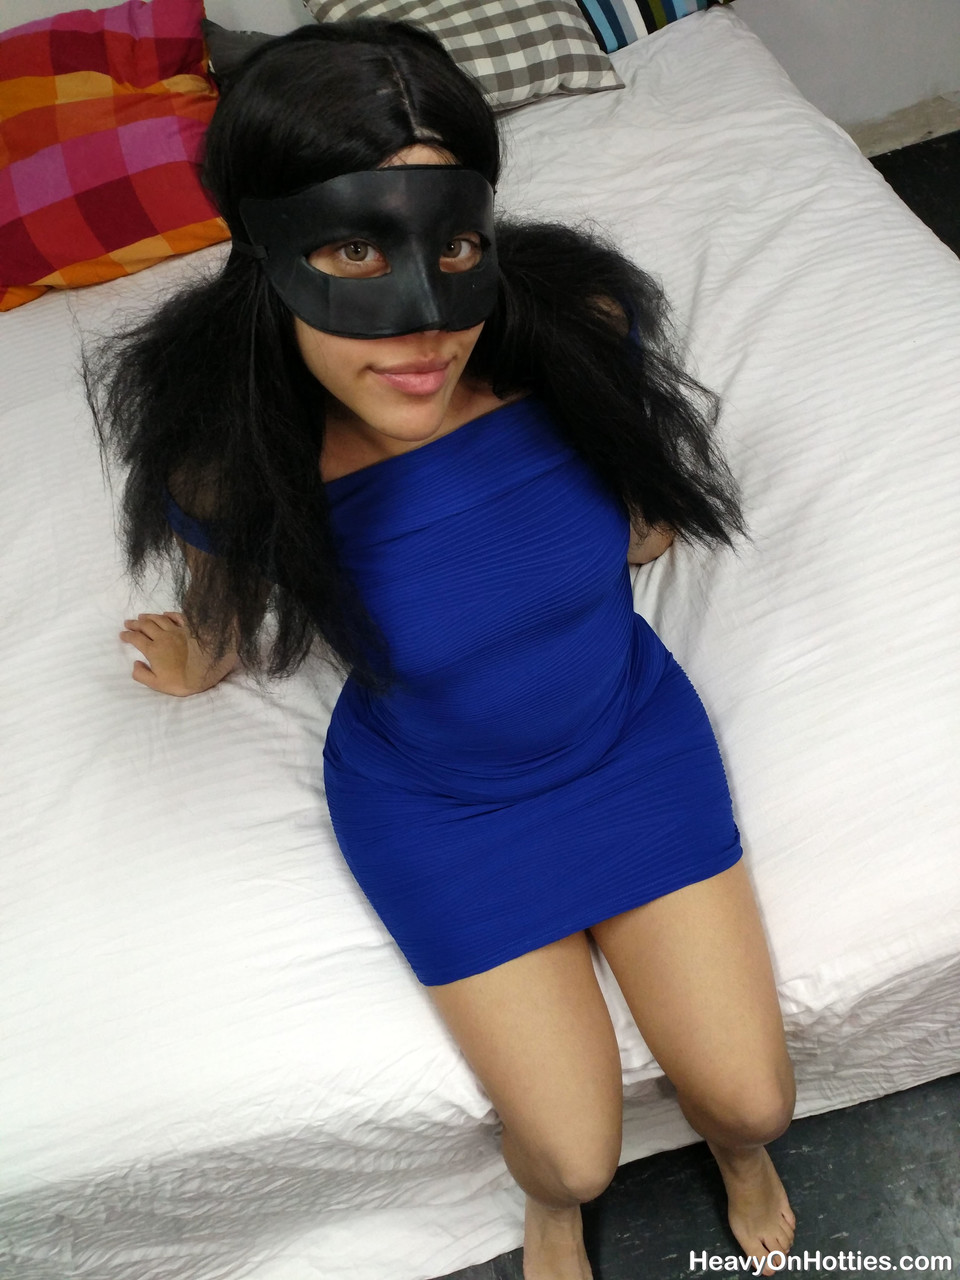 Horny masked amateur Canela Mask reveals her small tits and hot ass foto porno #424784991 | Heavy On Hotties Pics, Canela Mask, Ass, porno móvil